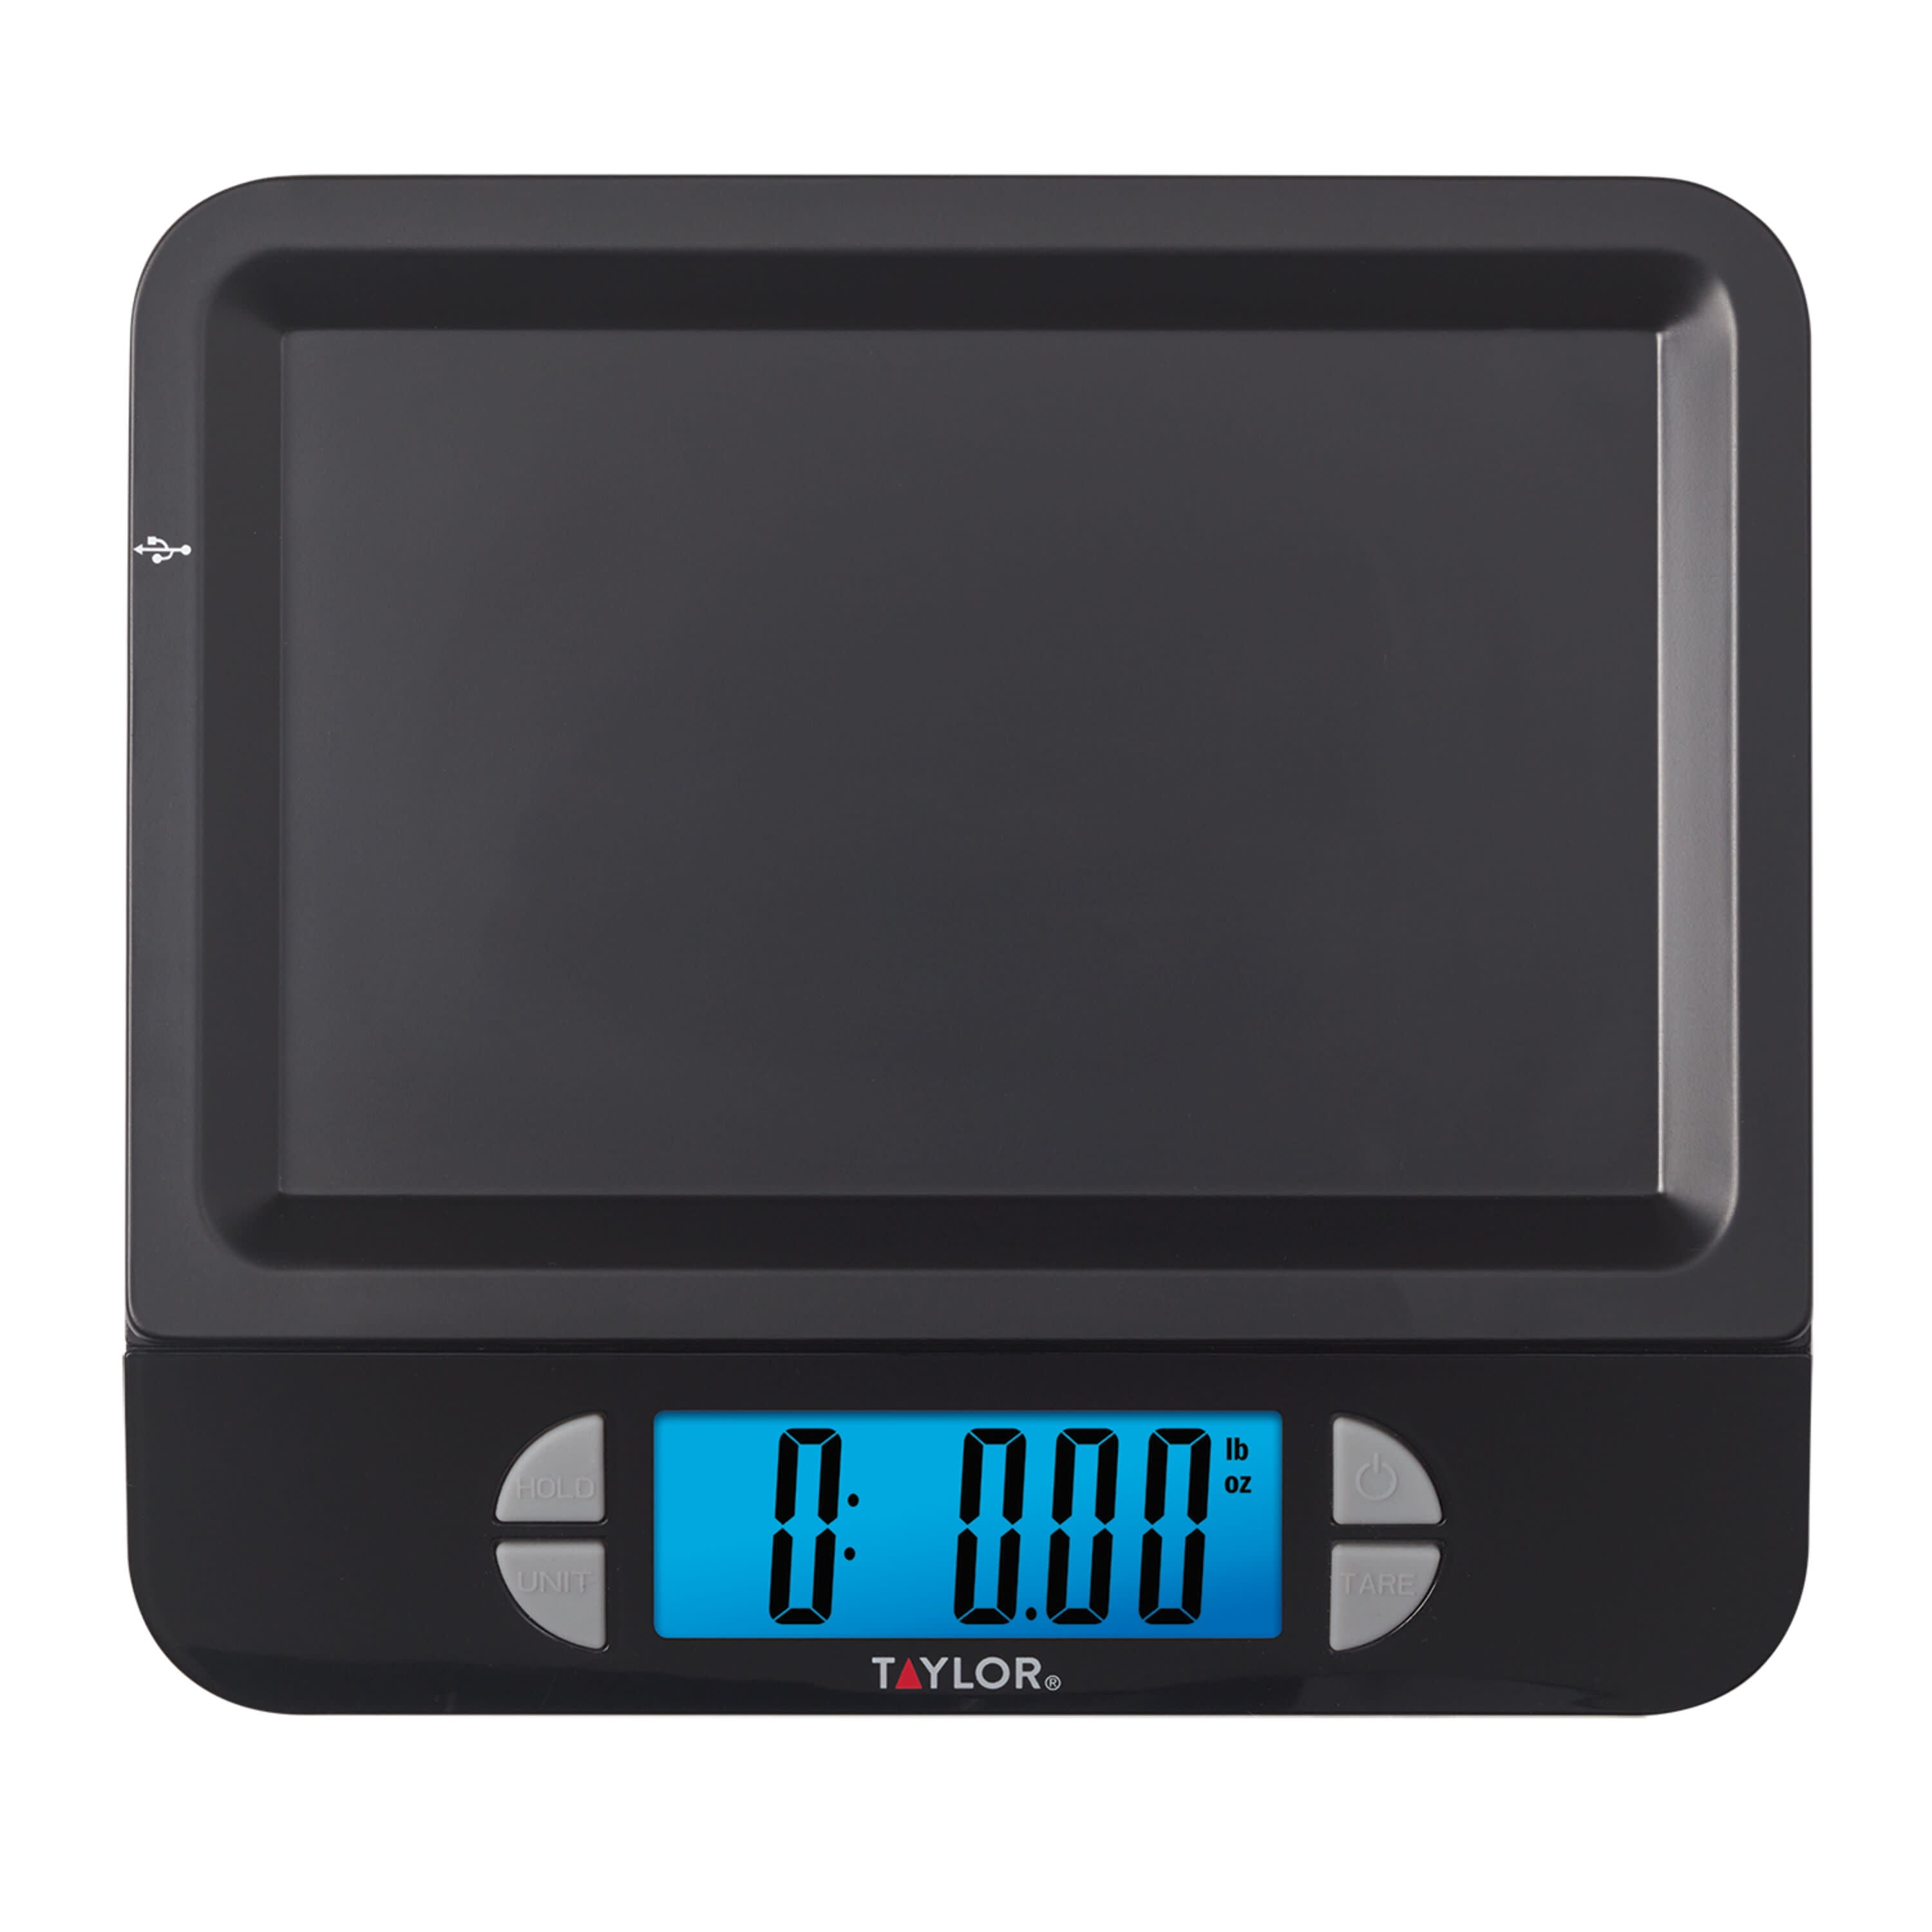 With Timer for Food Balance Weighing Mini Household Weighing Scale